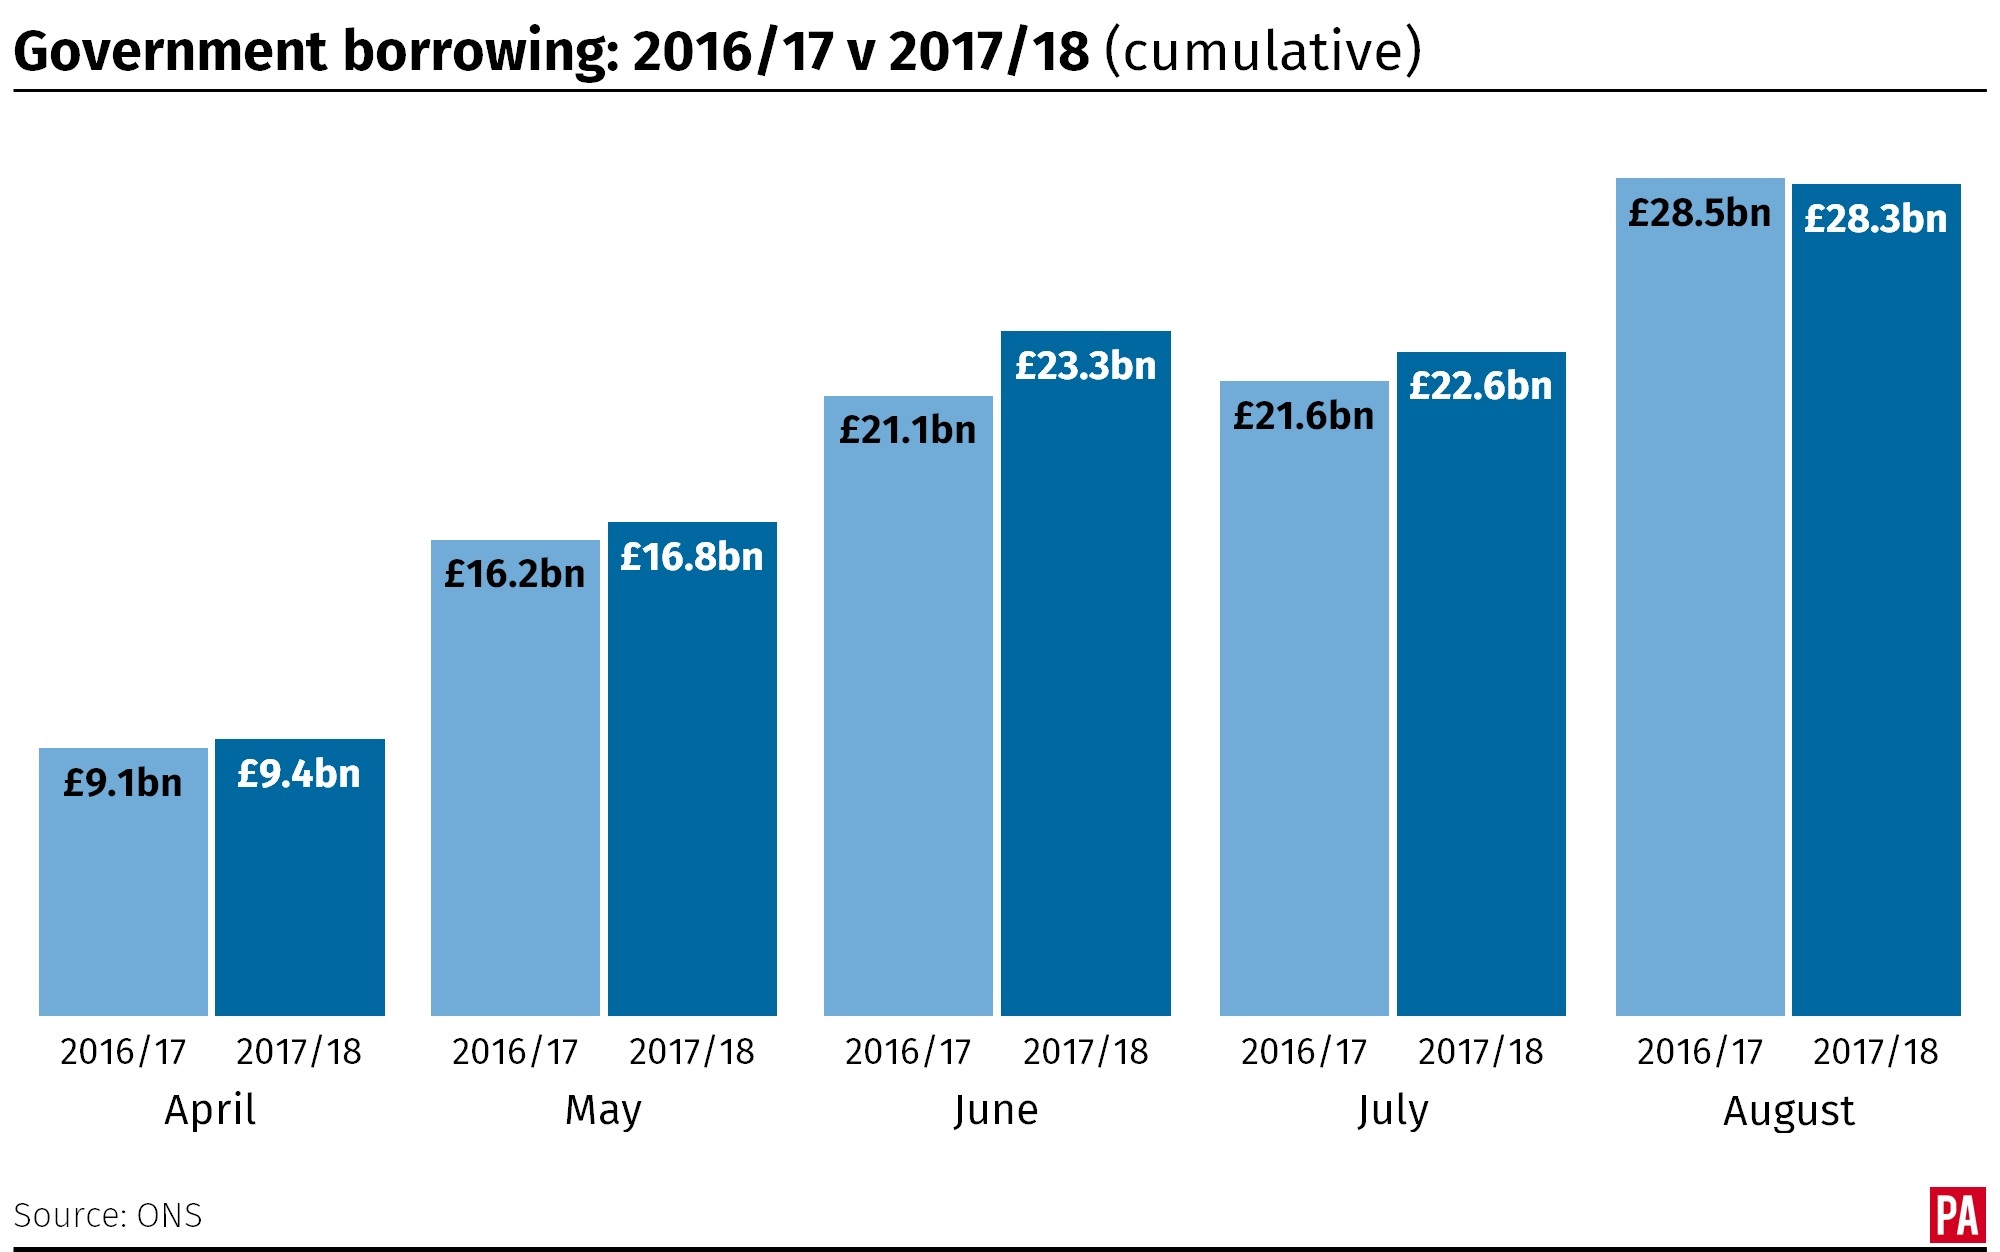 Government borrowing 2016/17 v 2017/18, showing the cumulative financial year to date. 